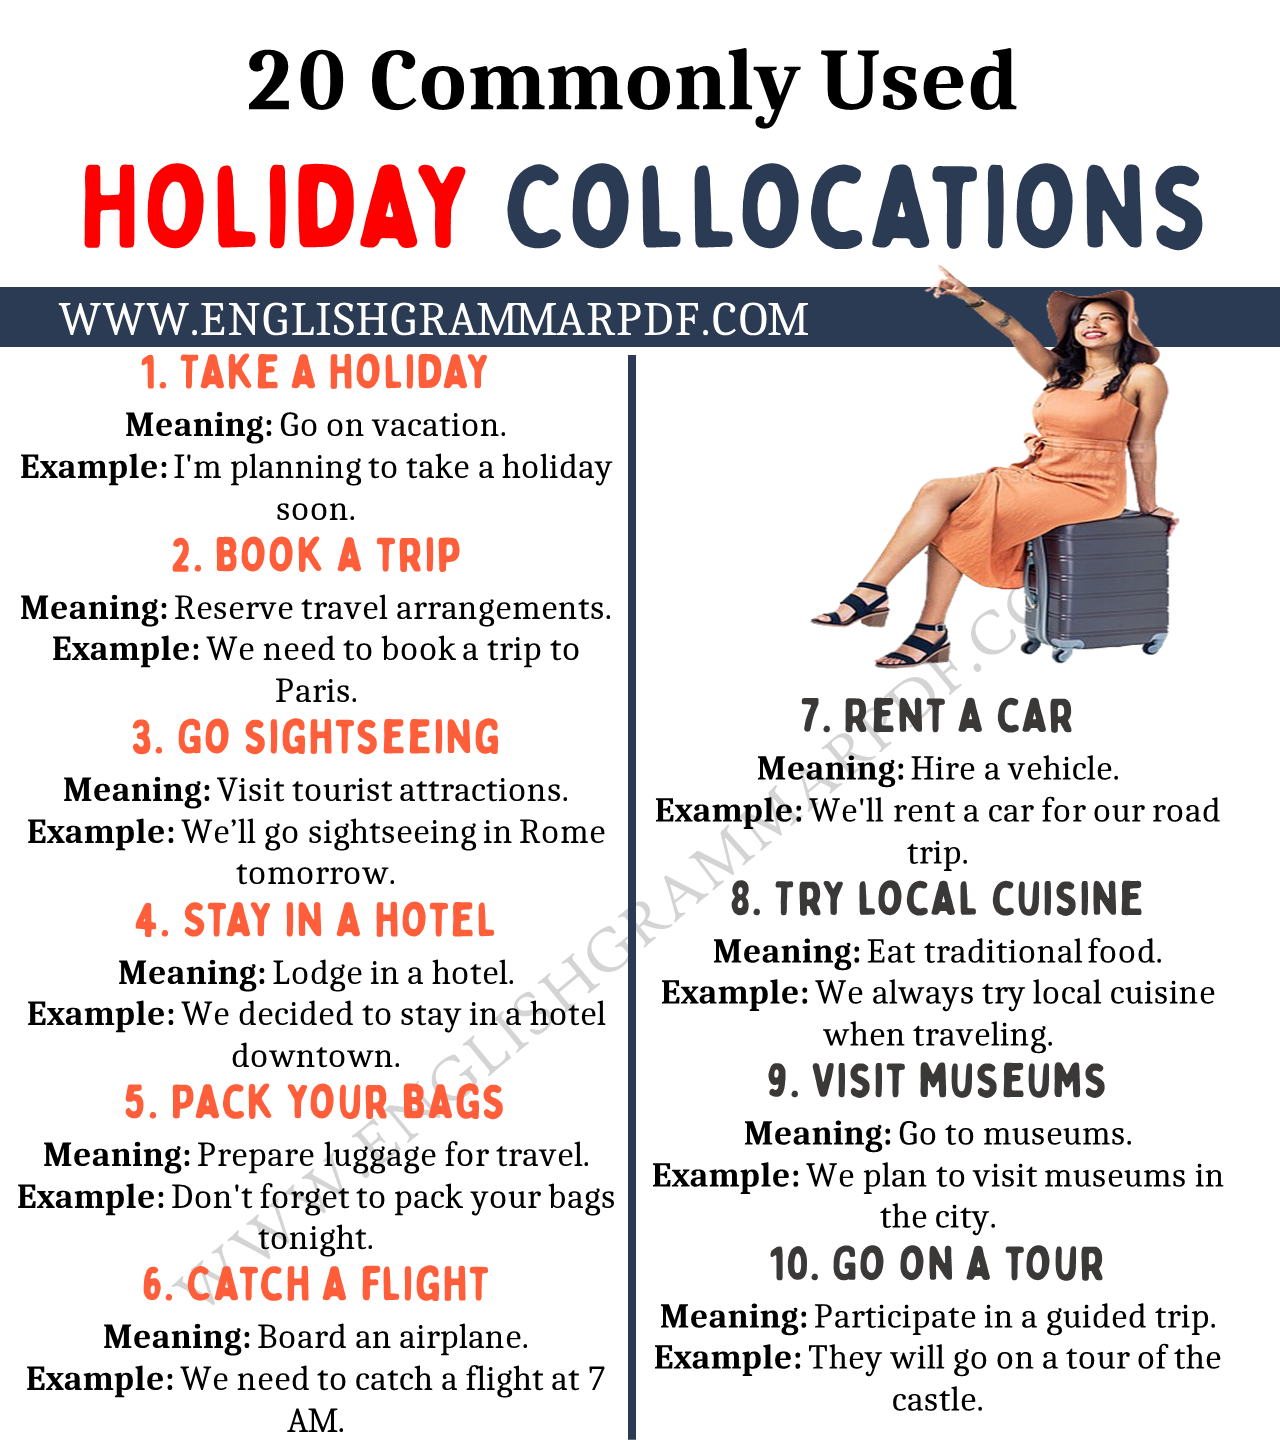 20 Commonly Used Holiday Collocations